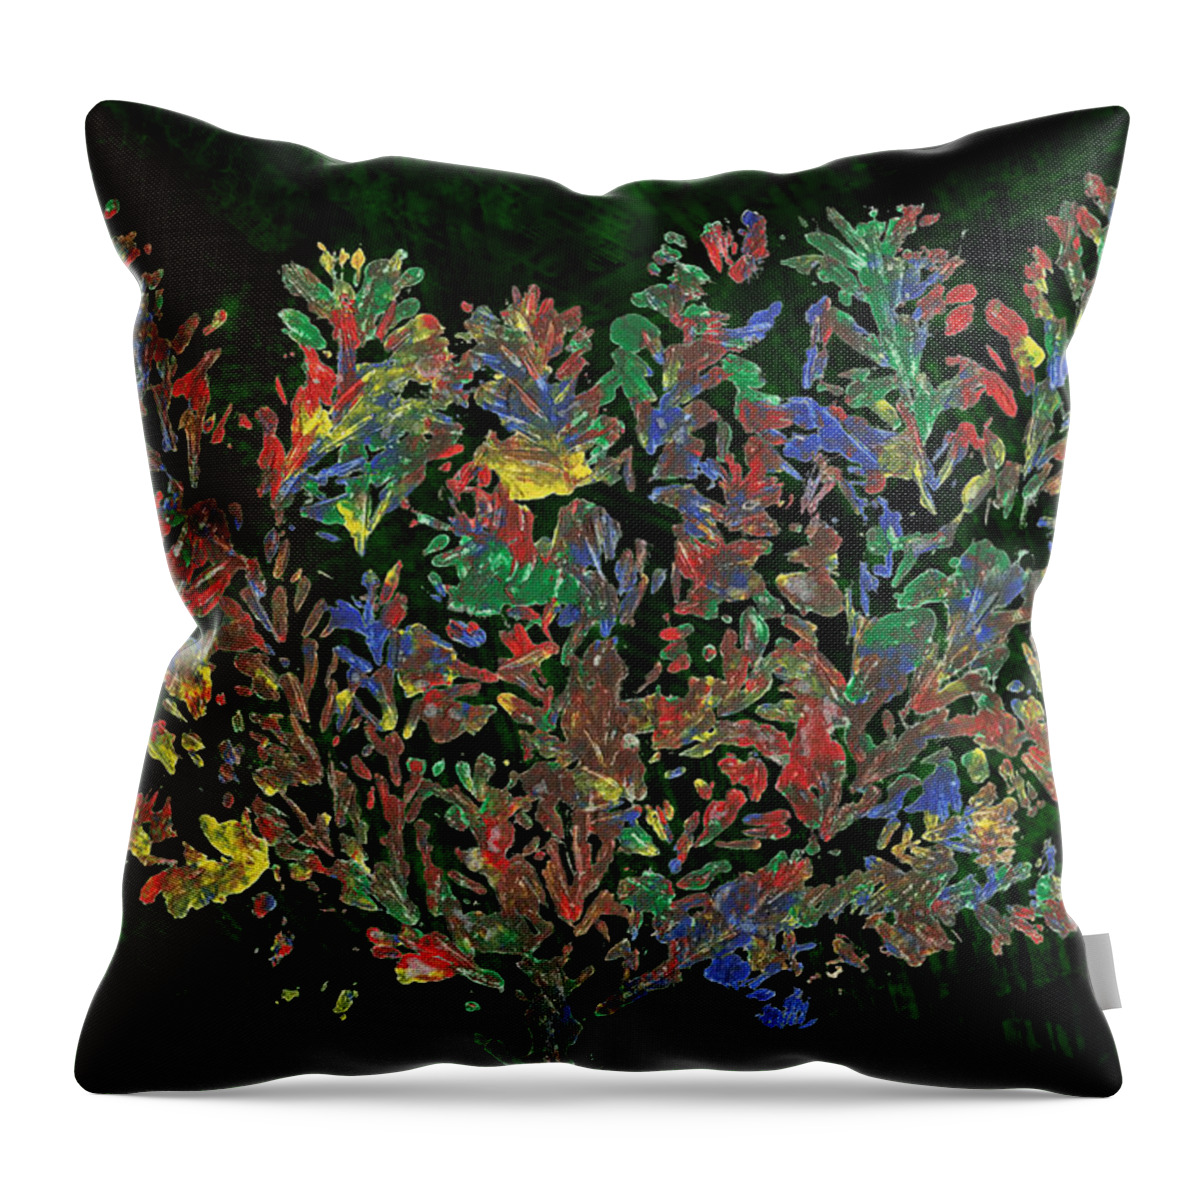 Autumn Throw Pillow featuring the painting Painted Nature 2 by Sami Tiainen